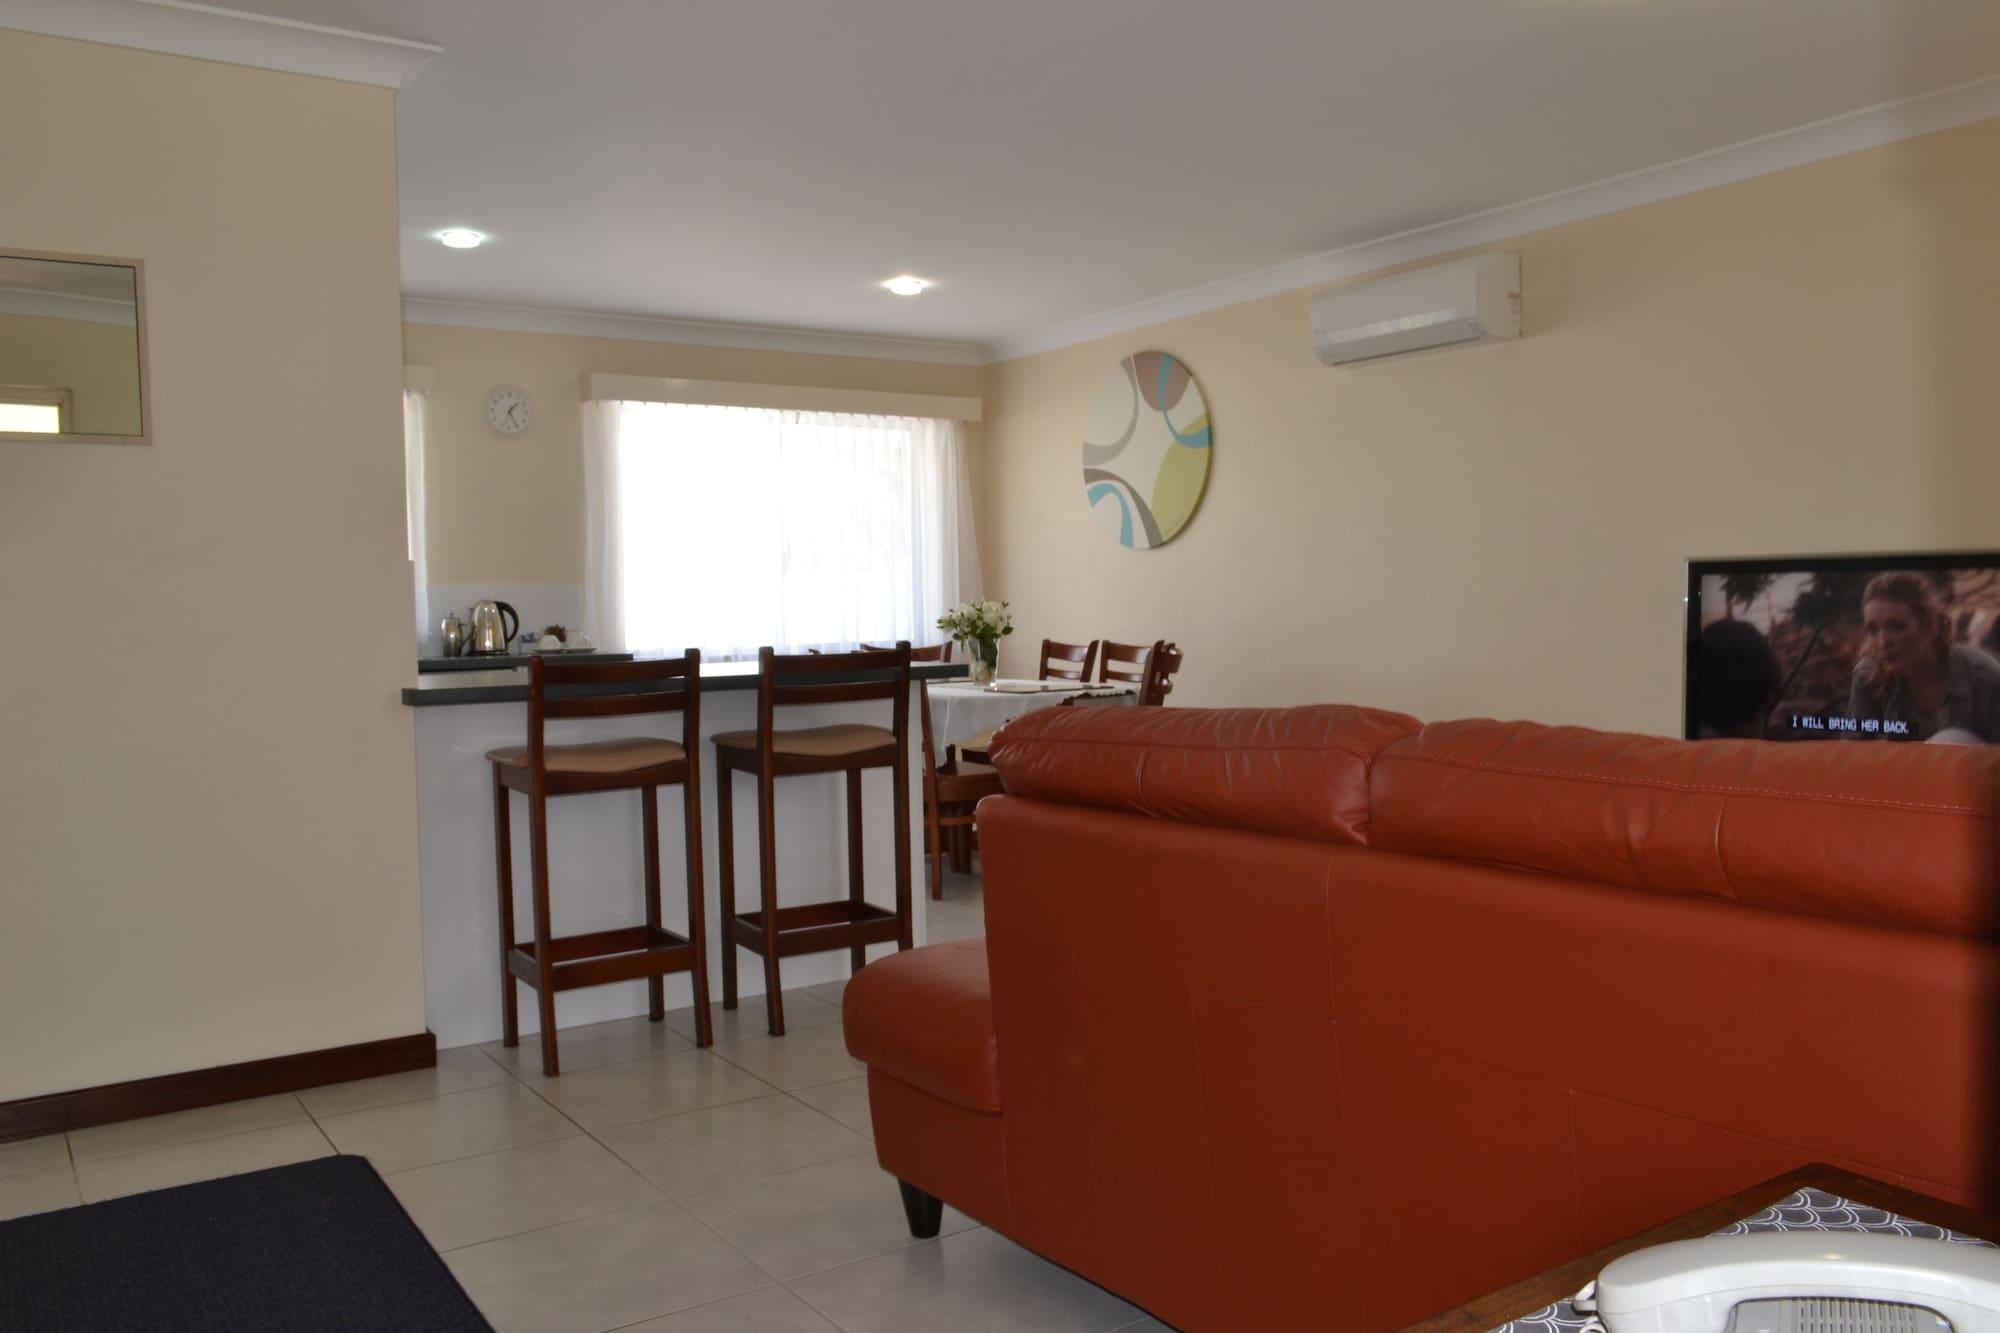 Dolphin Lodge Albany - Self Contained Apartments At Middleton Beach Ngoại thất bức ảnh